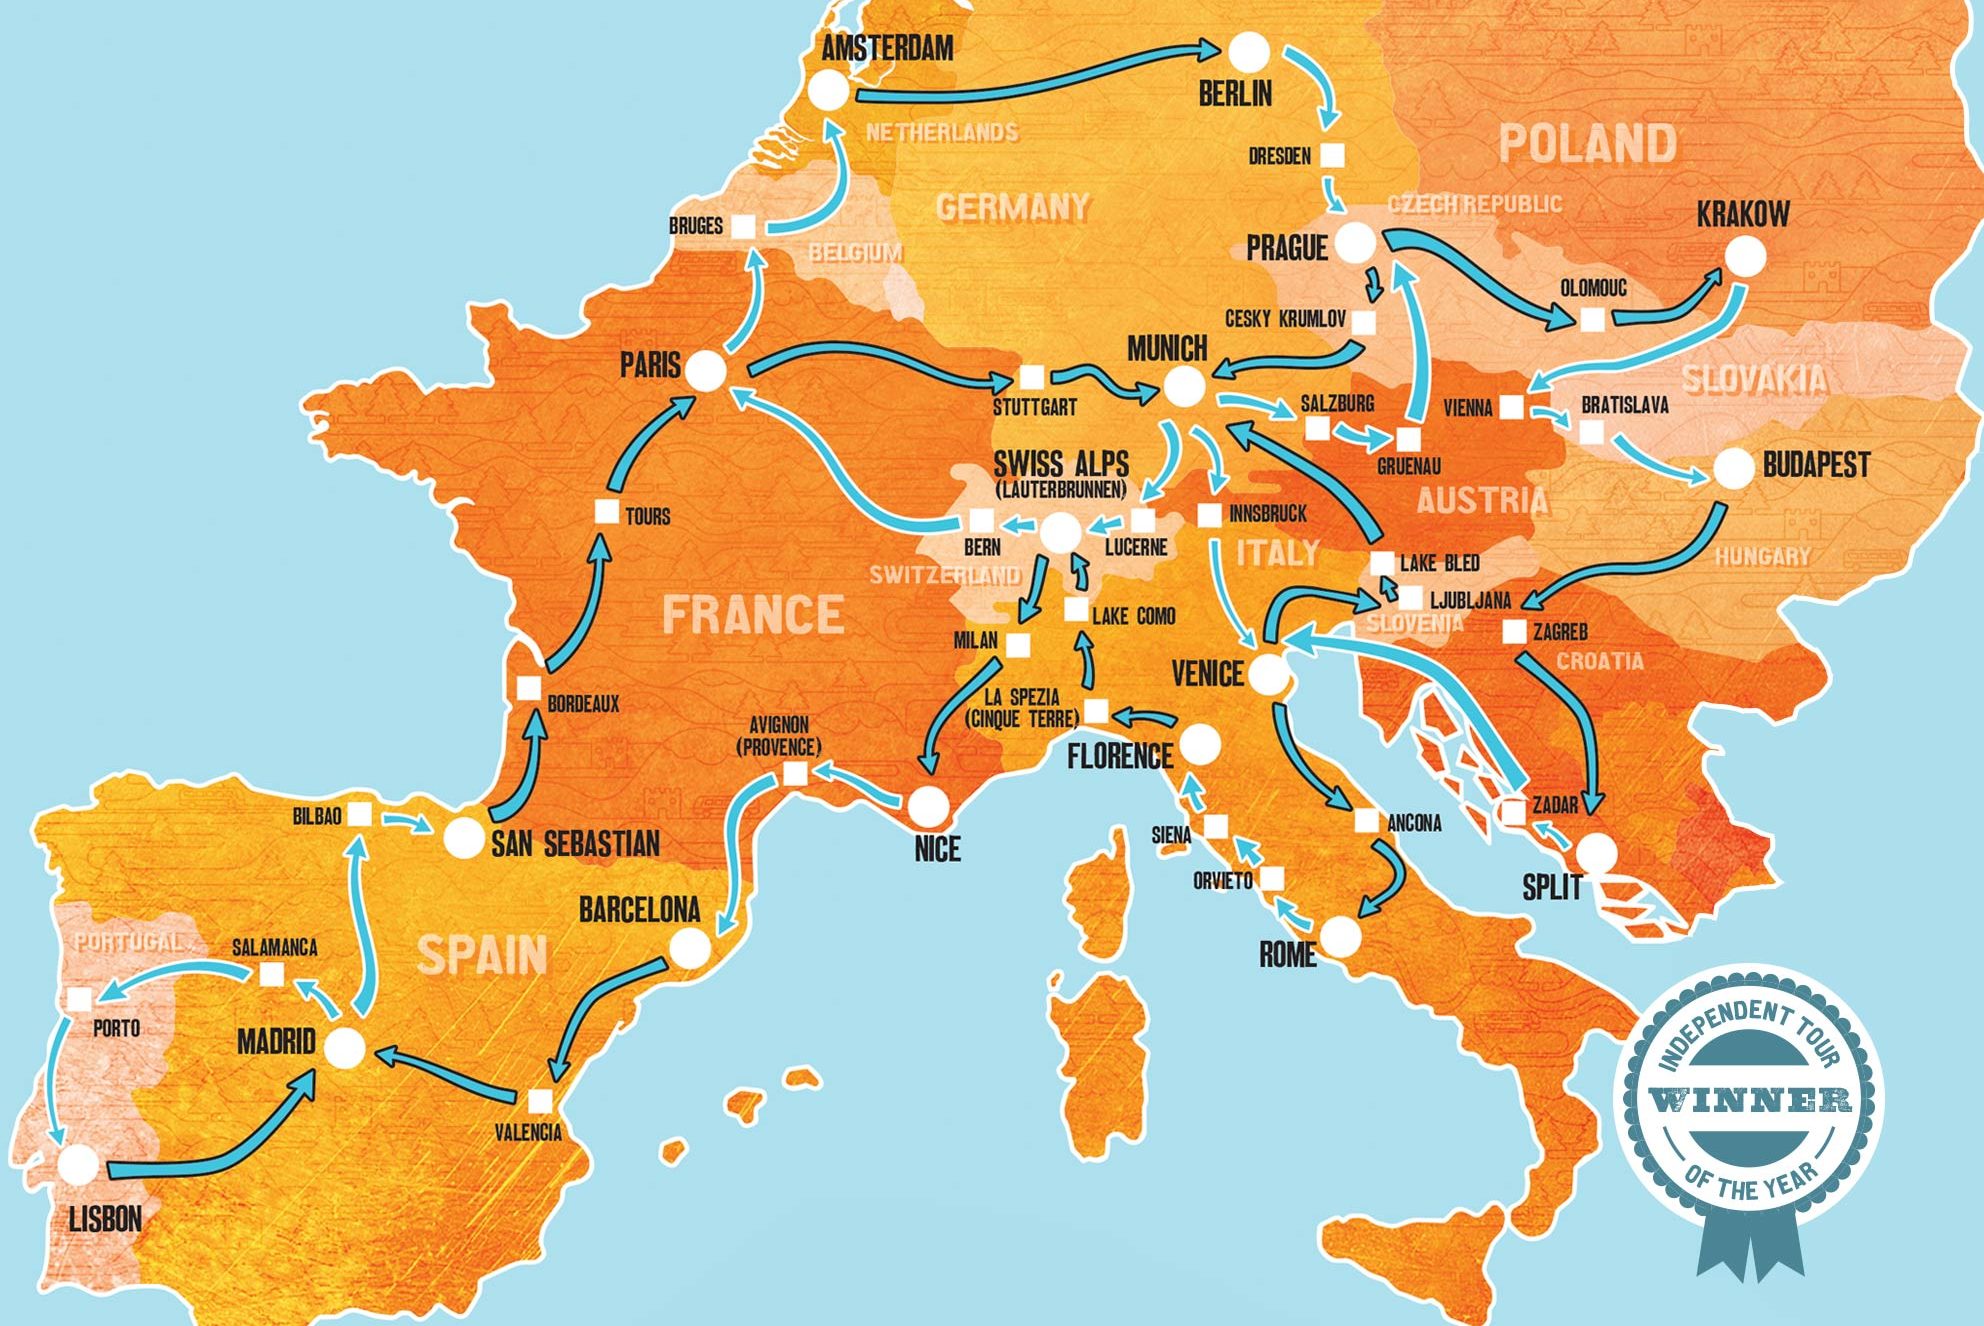 busabout europe tours